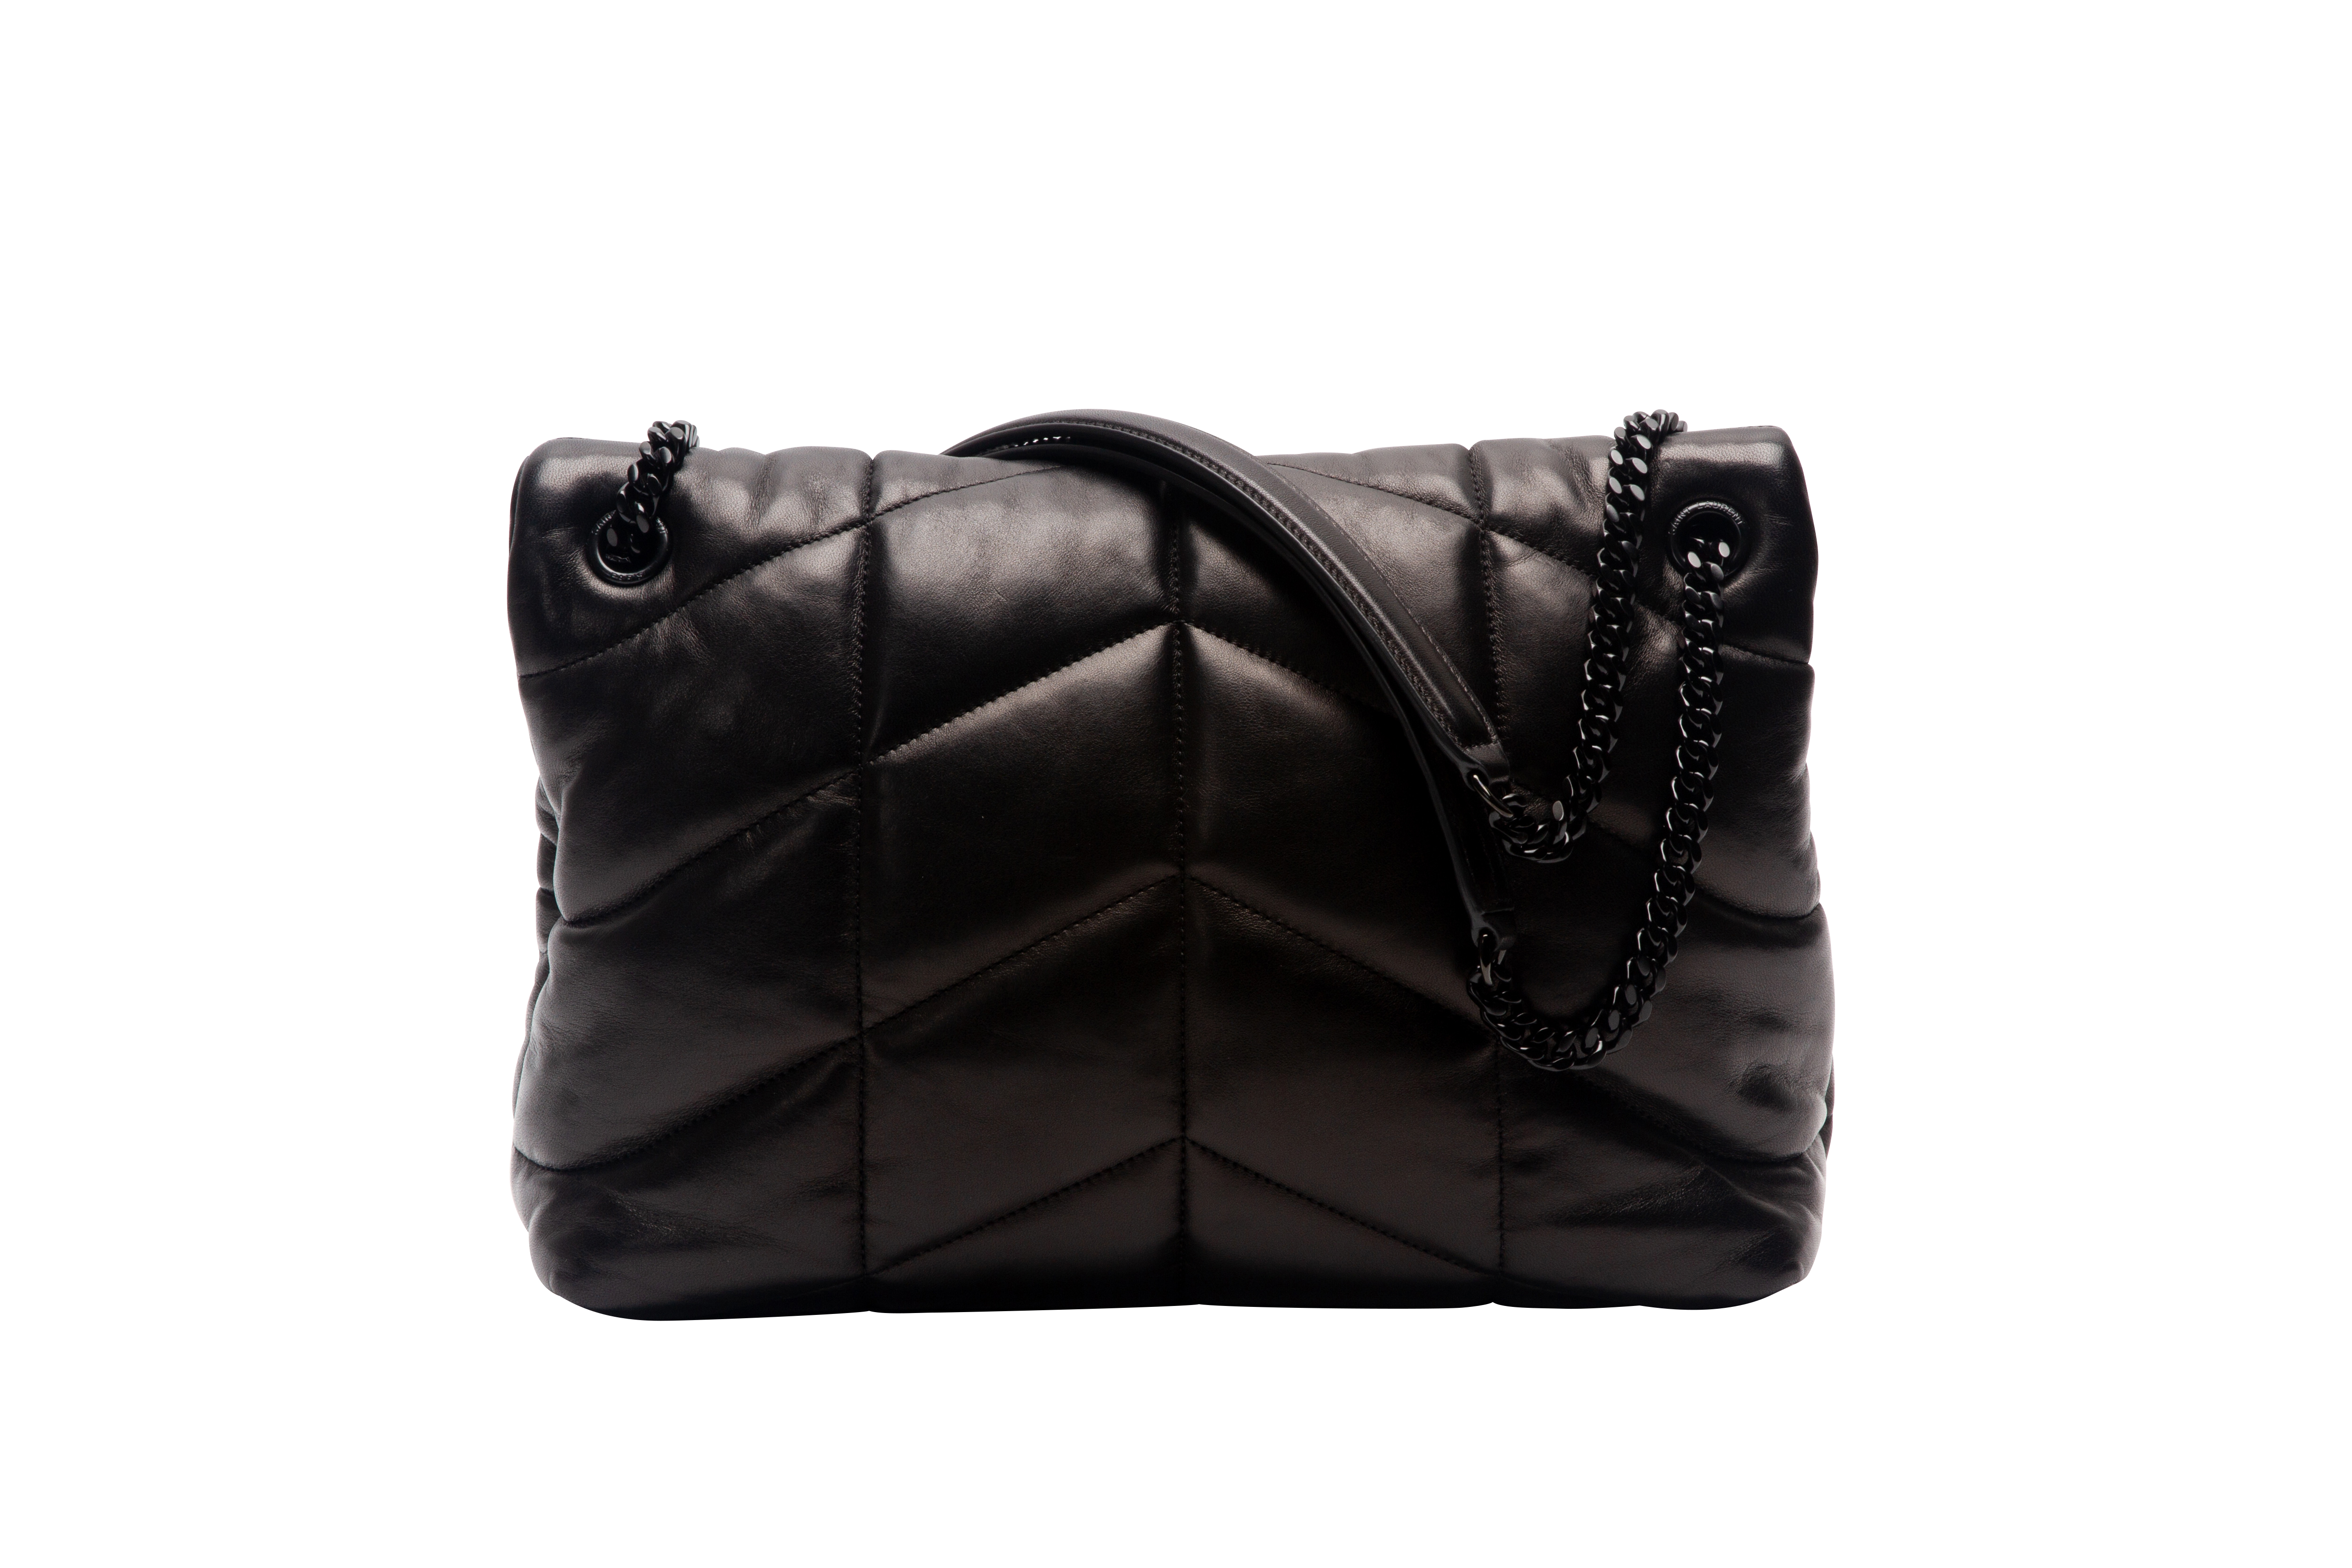 AN YVES SAINT LAURENT LOULOU QUILTED LEATHER SHOULDER BAG - Image 4 of 5